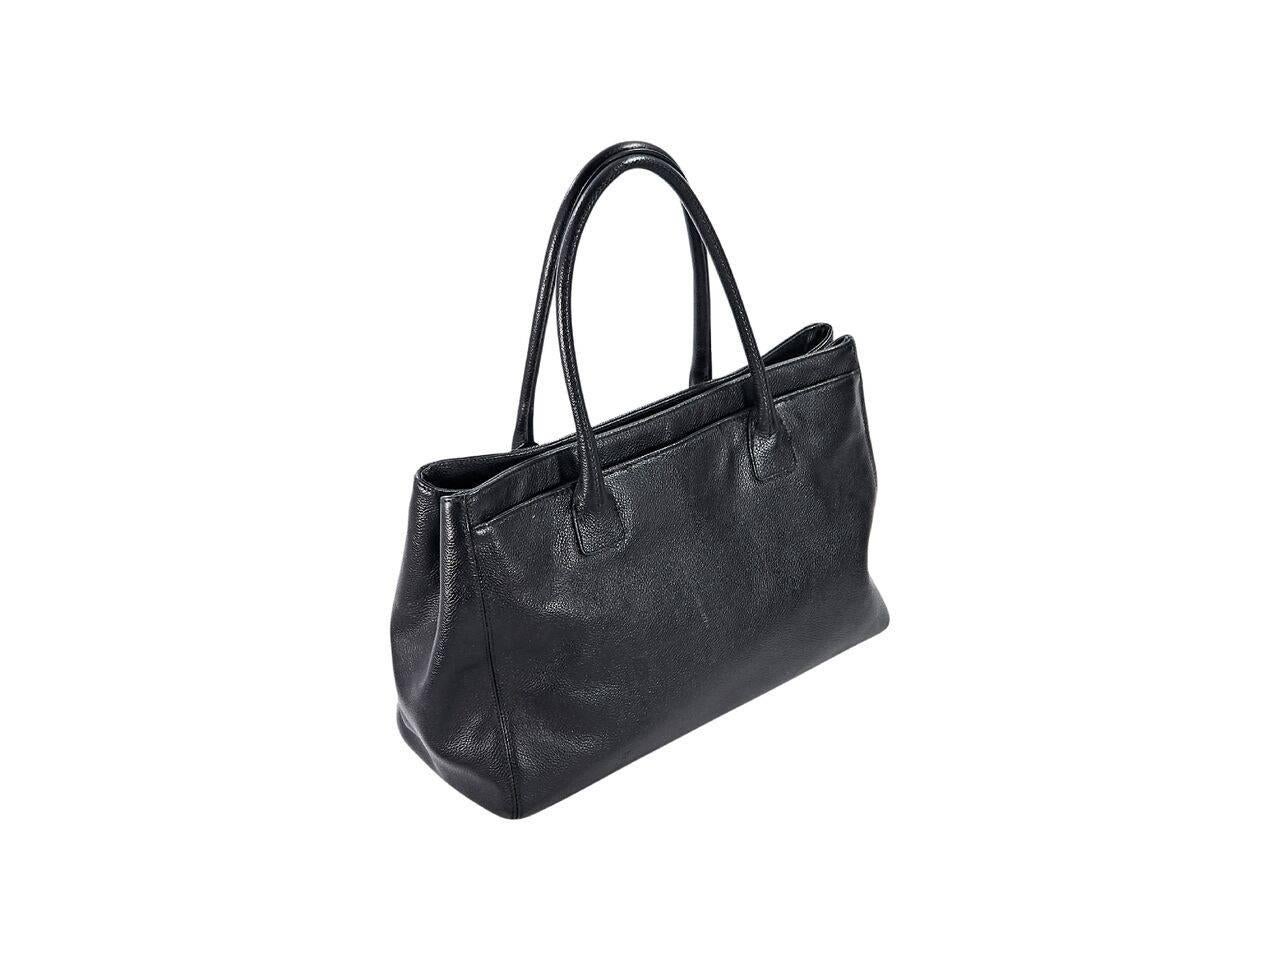 Product details:  Black leather Reissue tote bag by Chanel.  Dual shoulder straps.  Front twist-lock close front compartment.  Double magnetic snap close center compartment.  Lined interiors with inner zip and slide pockets and removable zpouch. 